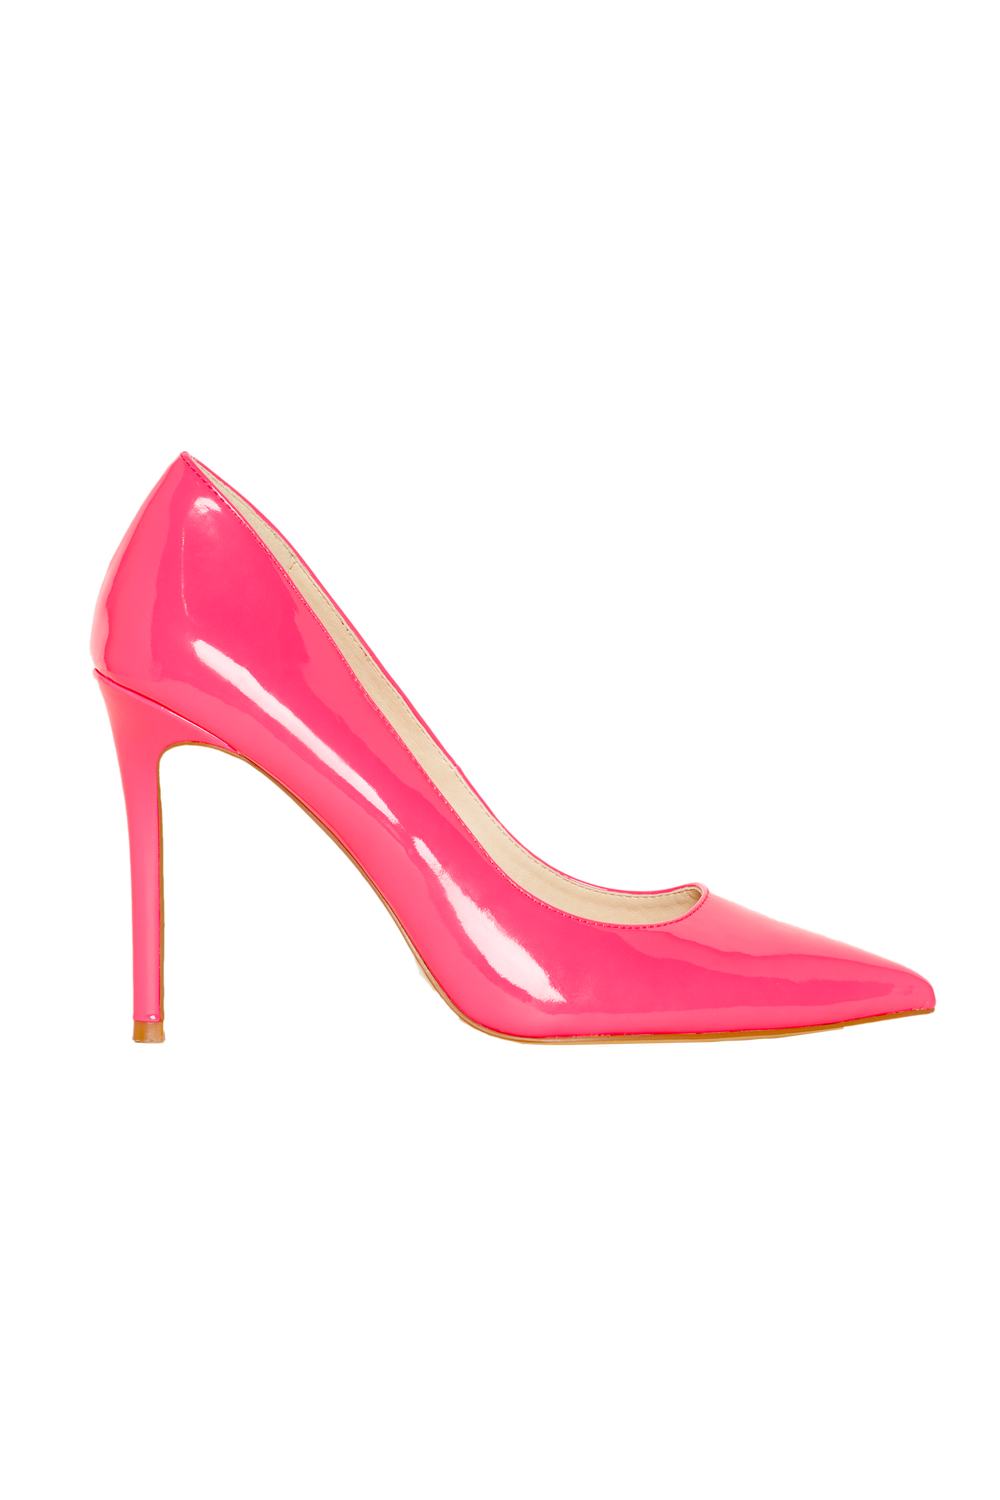 Kait Hot Pink Rhinestone Pointed-Toe Pumps